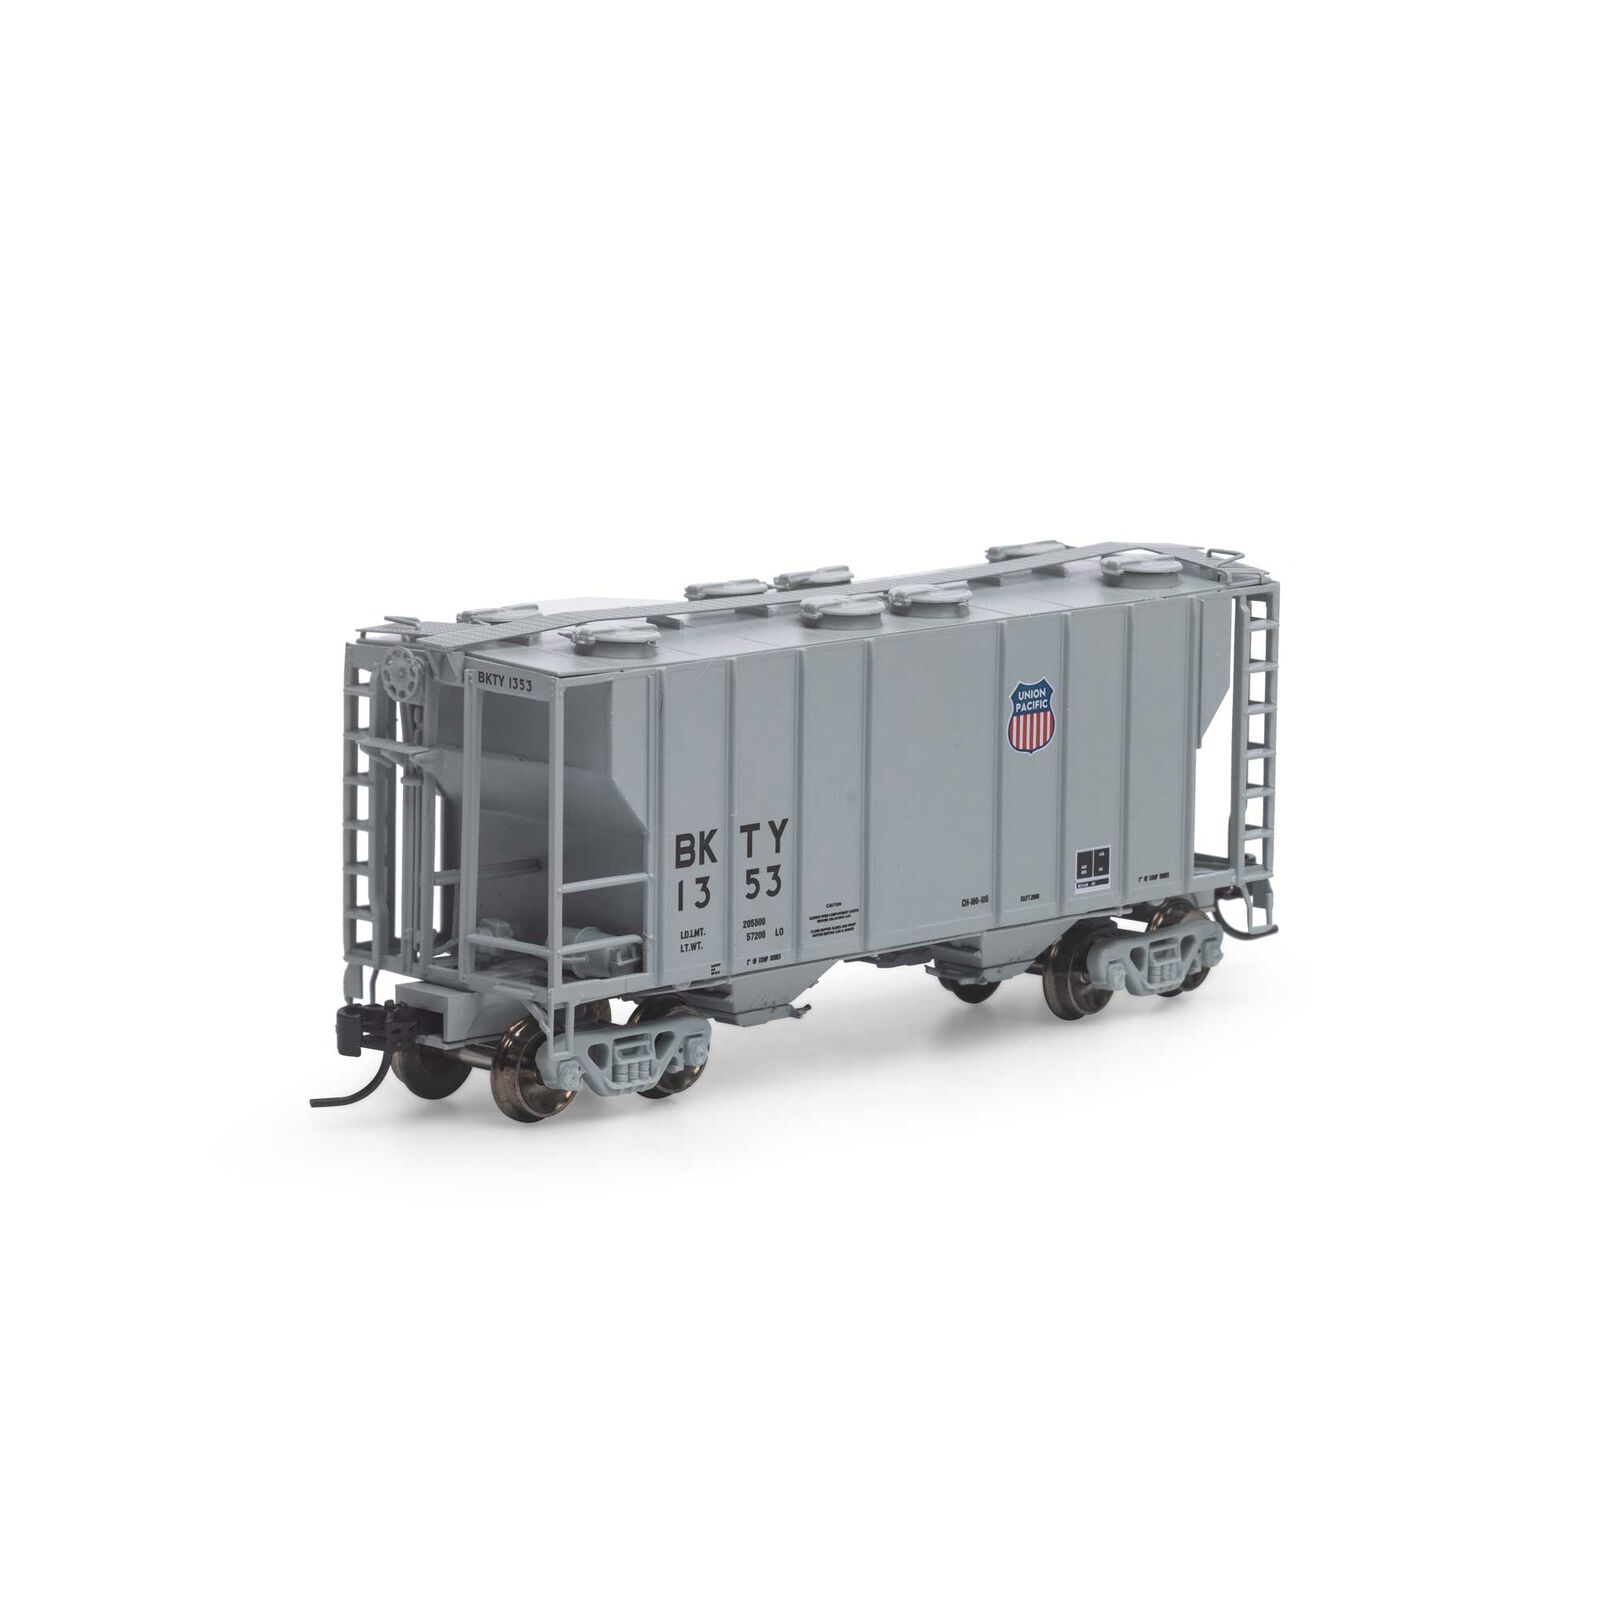 N PS-2 2600 Covered Hopper, UP #1353